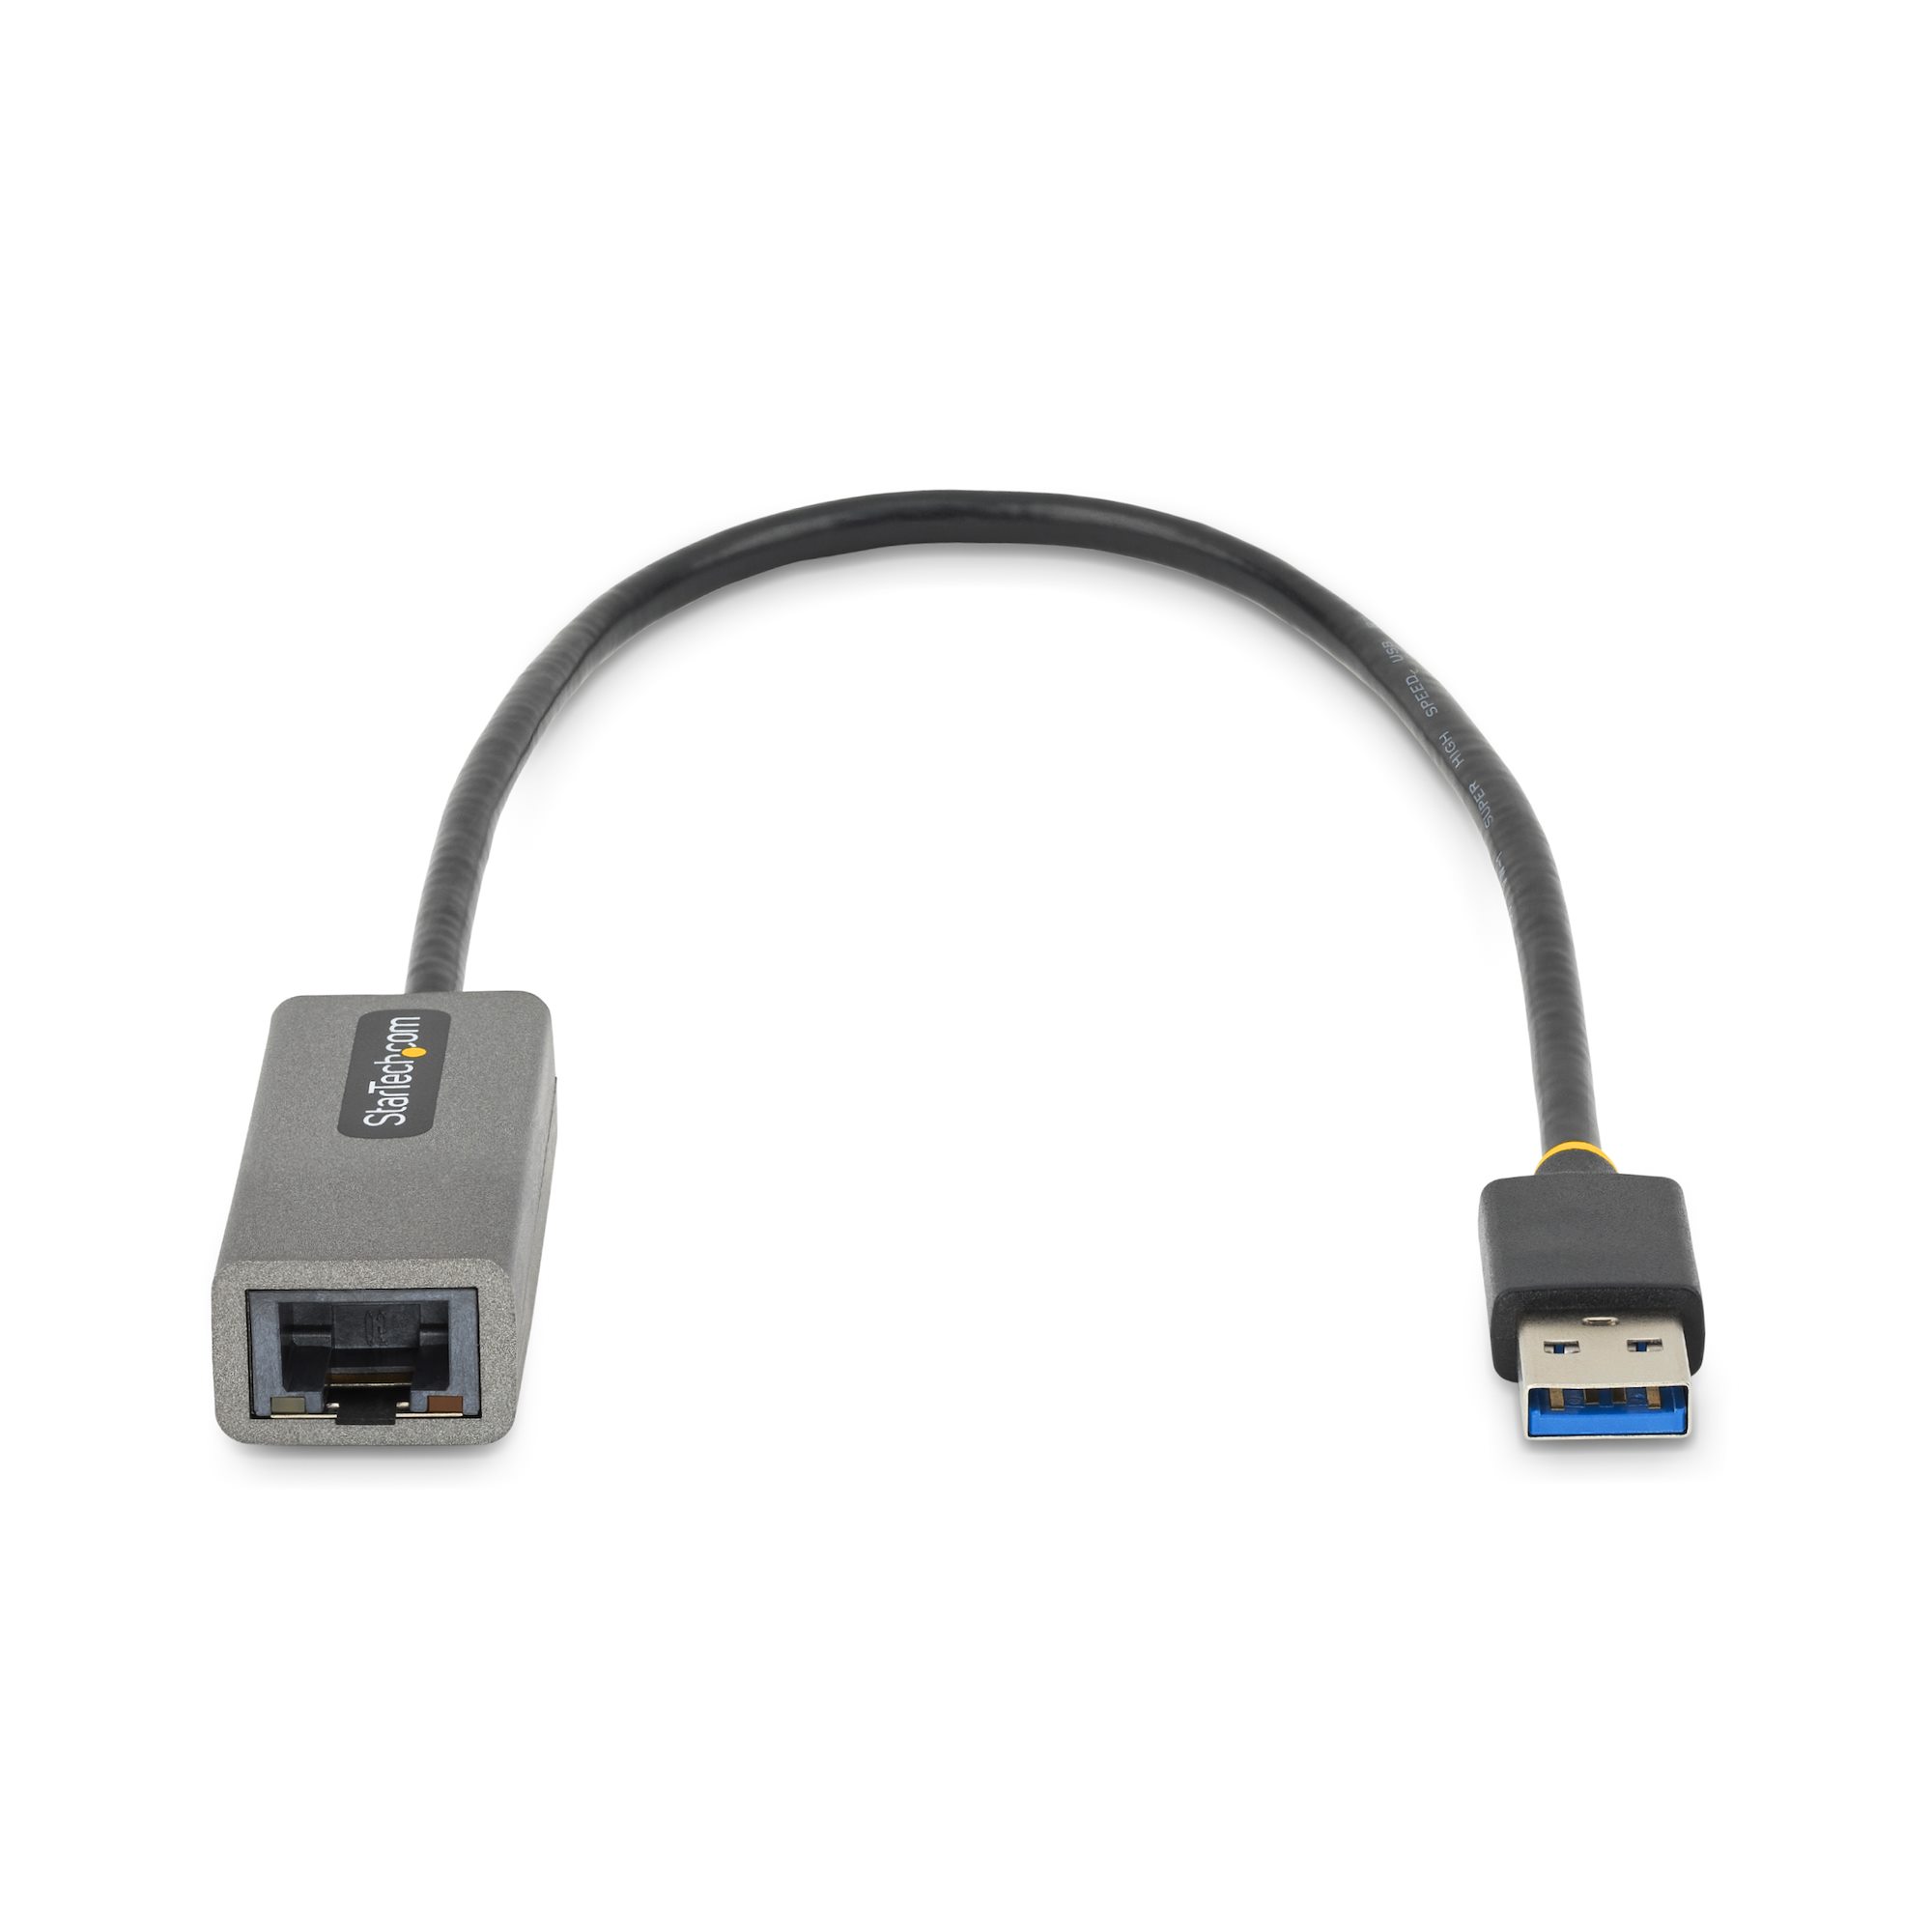 jury revidere Polar USB 3.0 to Ethernet Adapter, GbE Adapter - USB and Thunderbolt Network  Adapters | StarTech.com